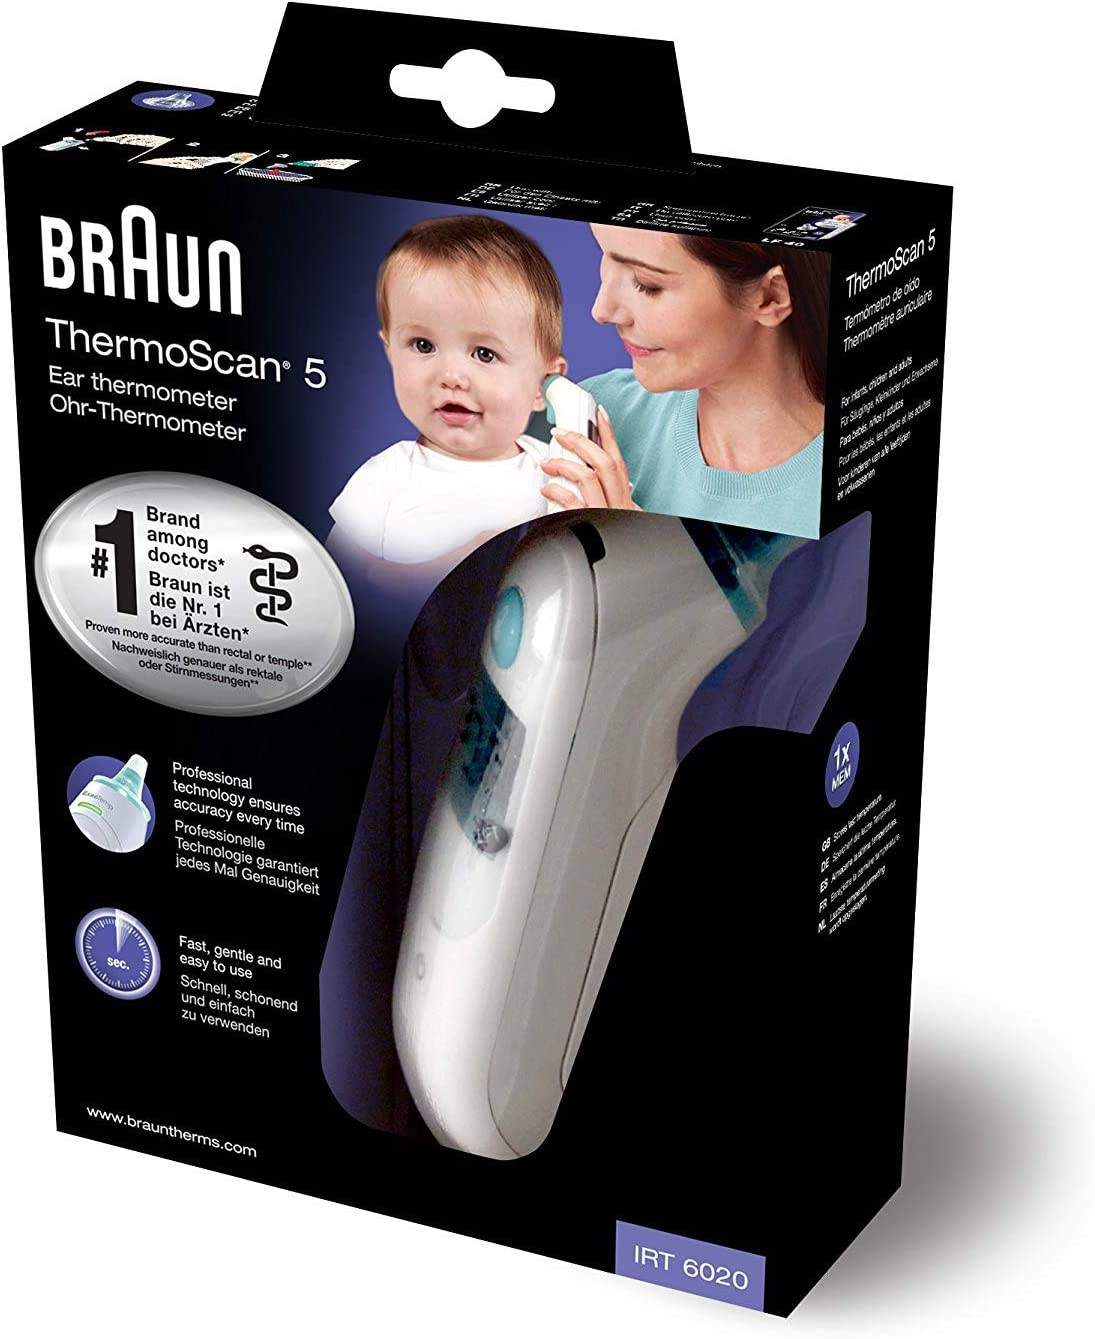 Braun ThermoScan 5 Ear Thermometer